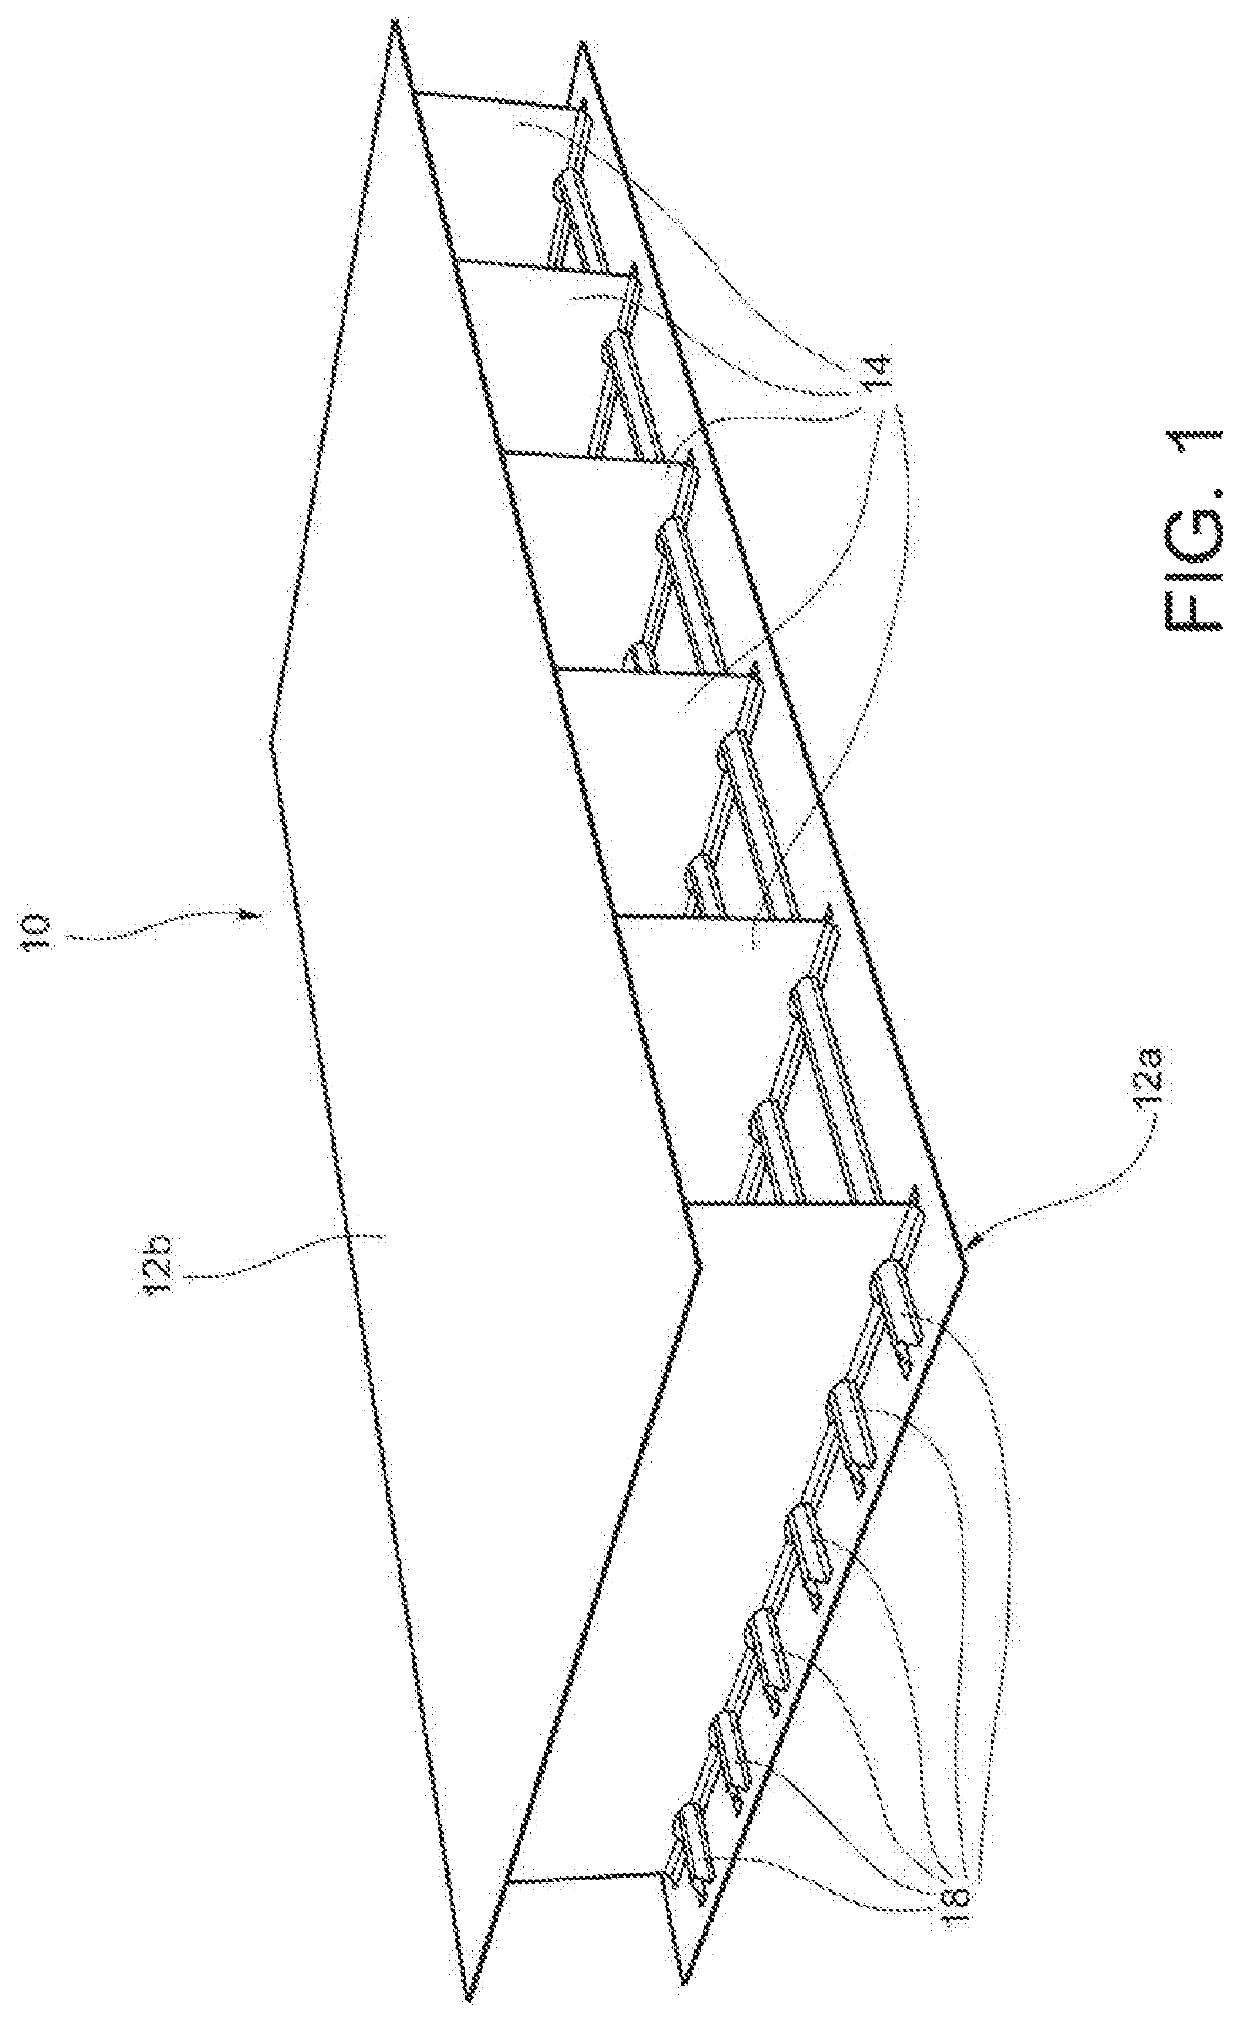 Method for manufacturing a multi-ribbed wing box of composite material with integrated stiffened panels